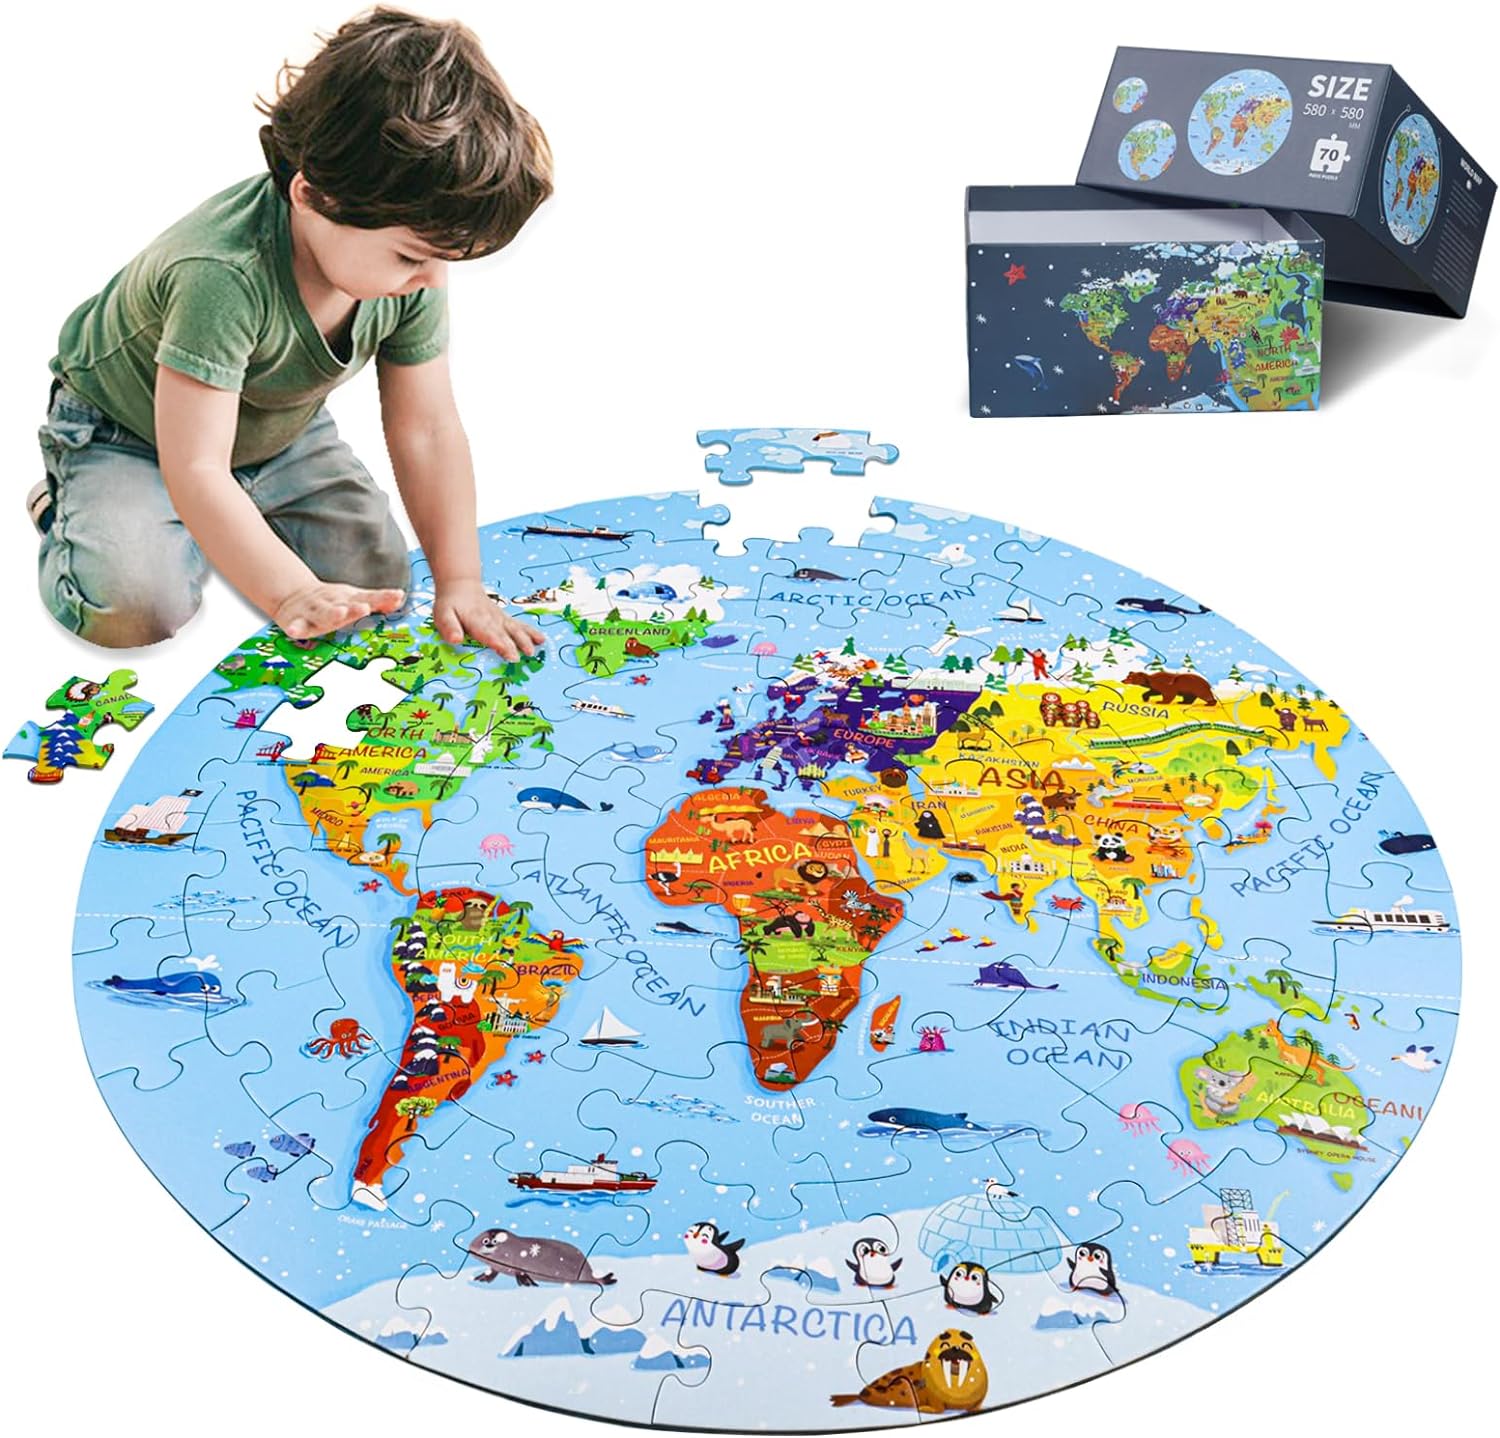 Read more about the article DIGOBAY World Map Jigsaw Puzzle Review